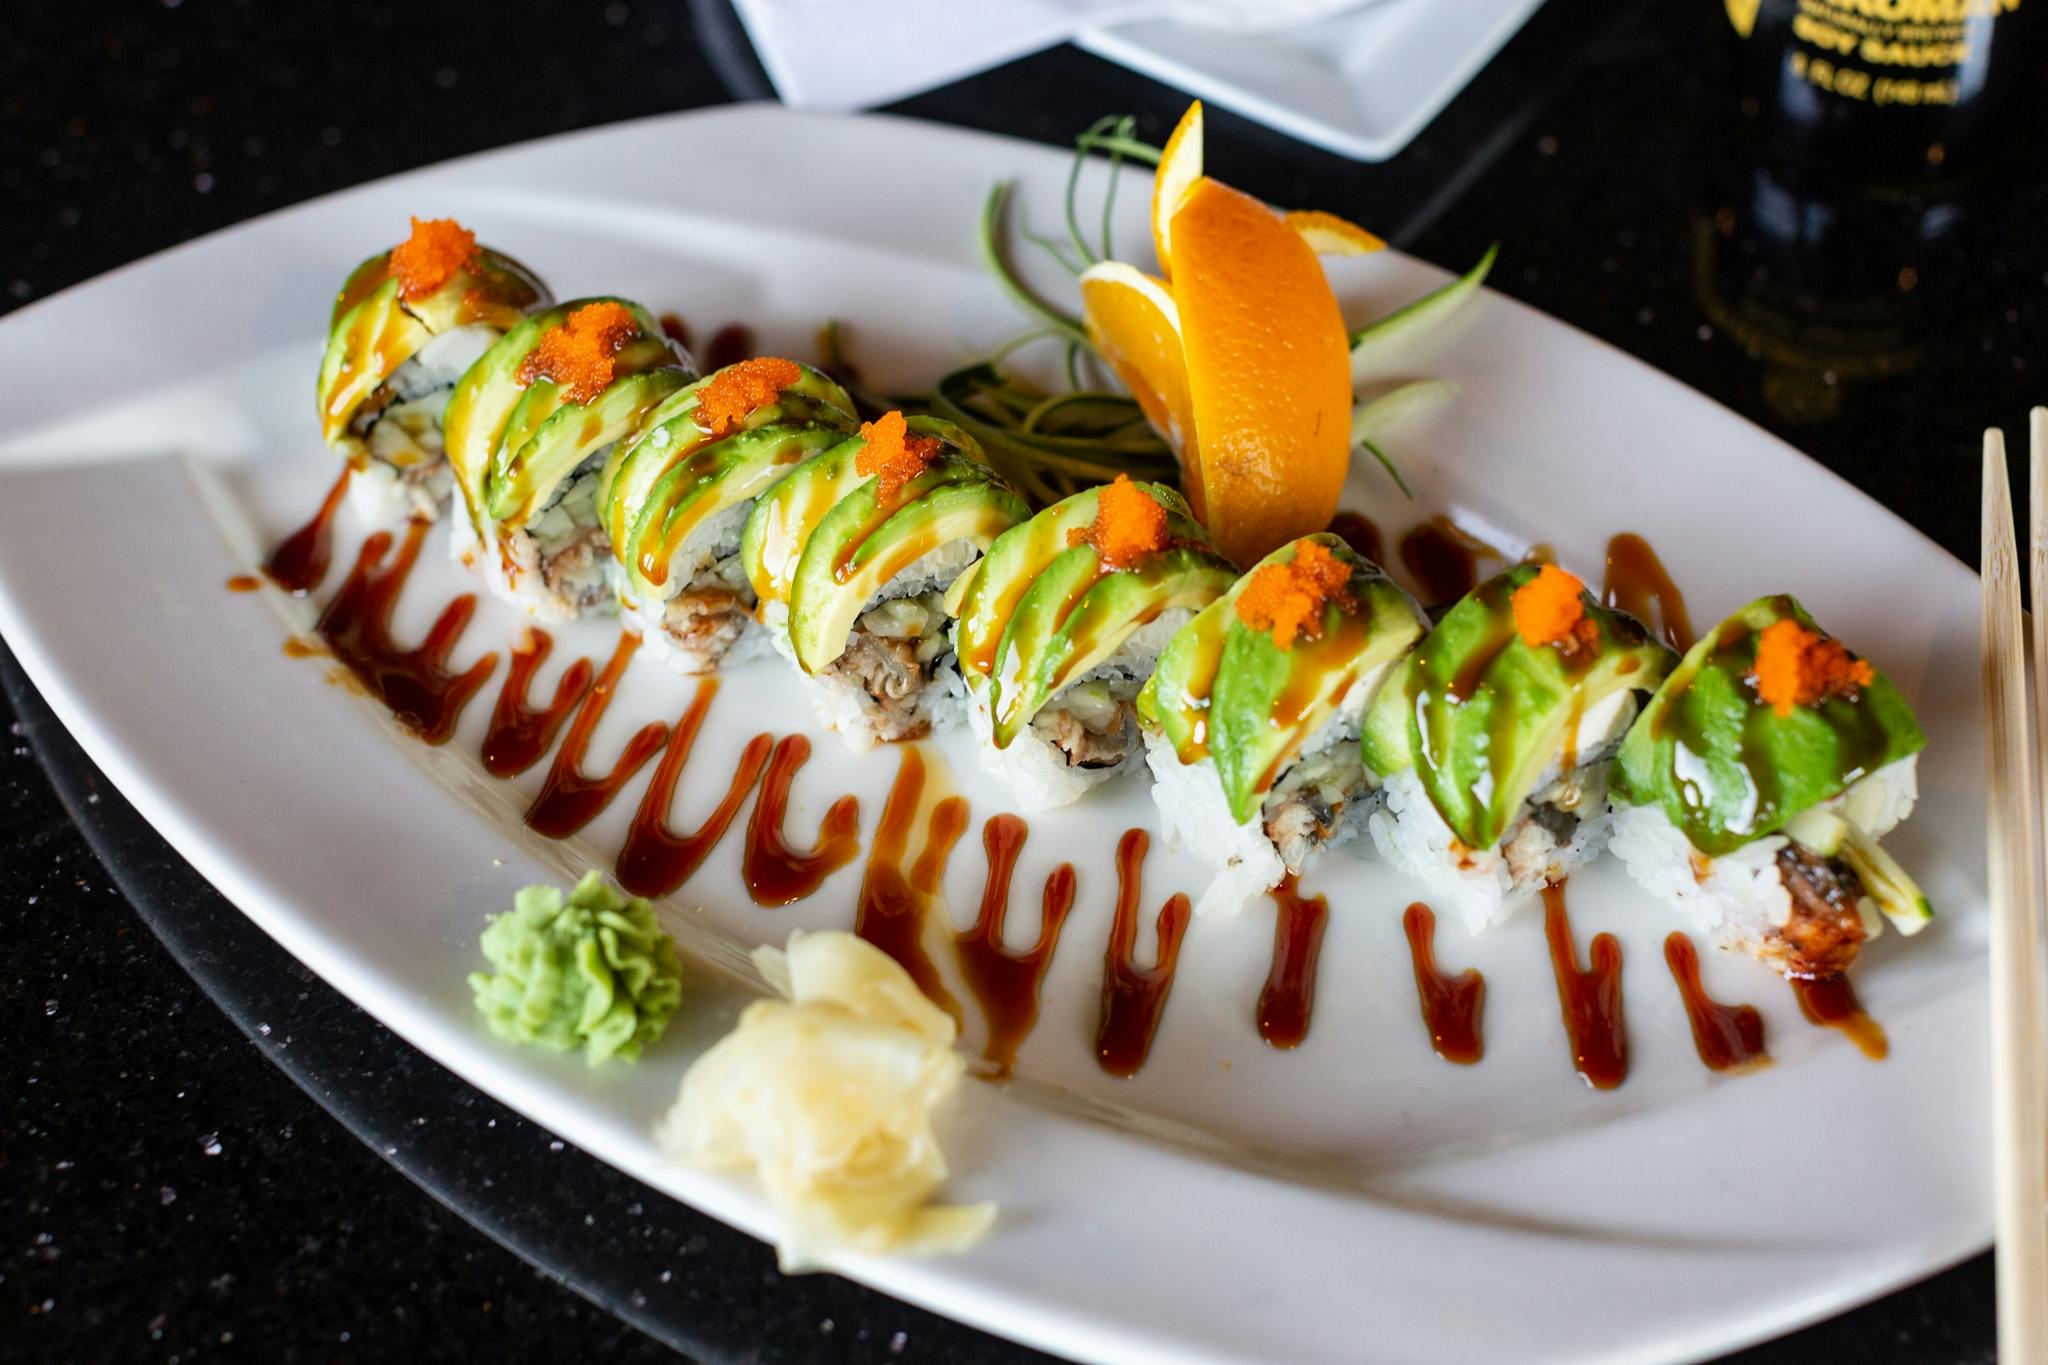 Dragon Roll from Oriental Bistro & Grill in Lawrence, KS